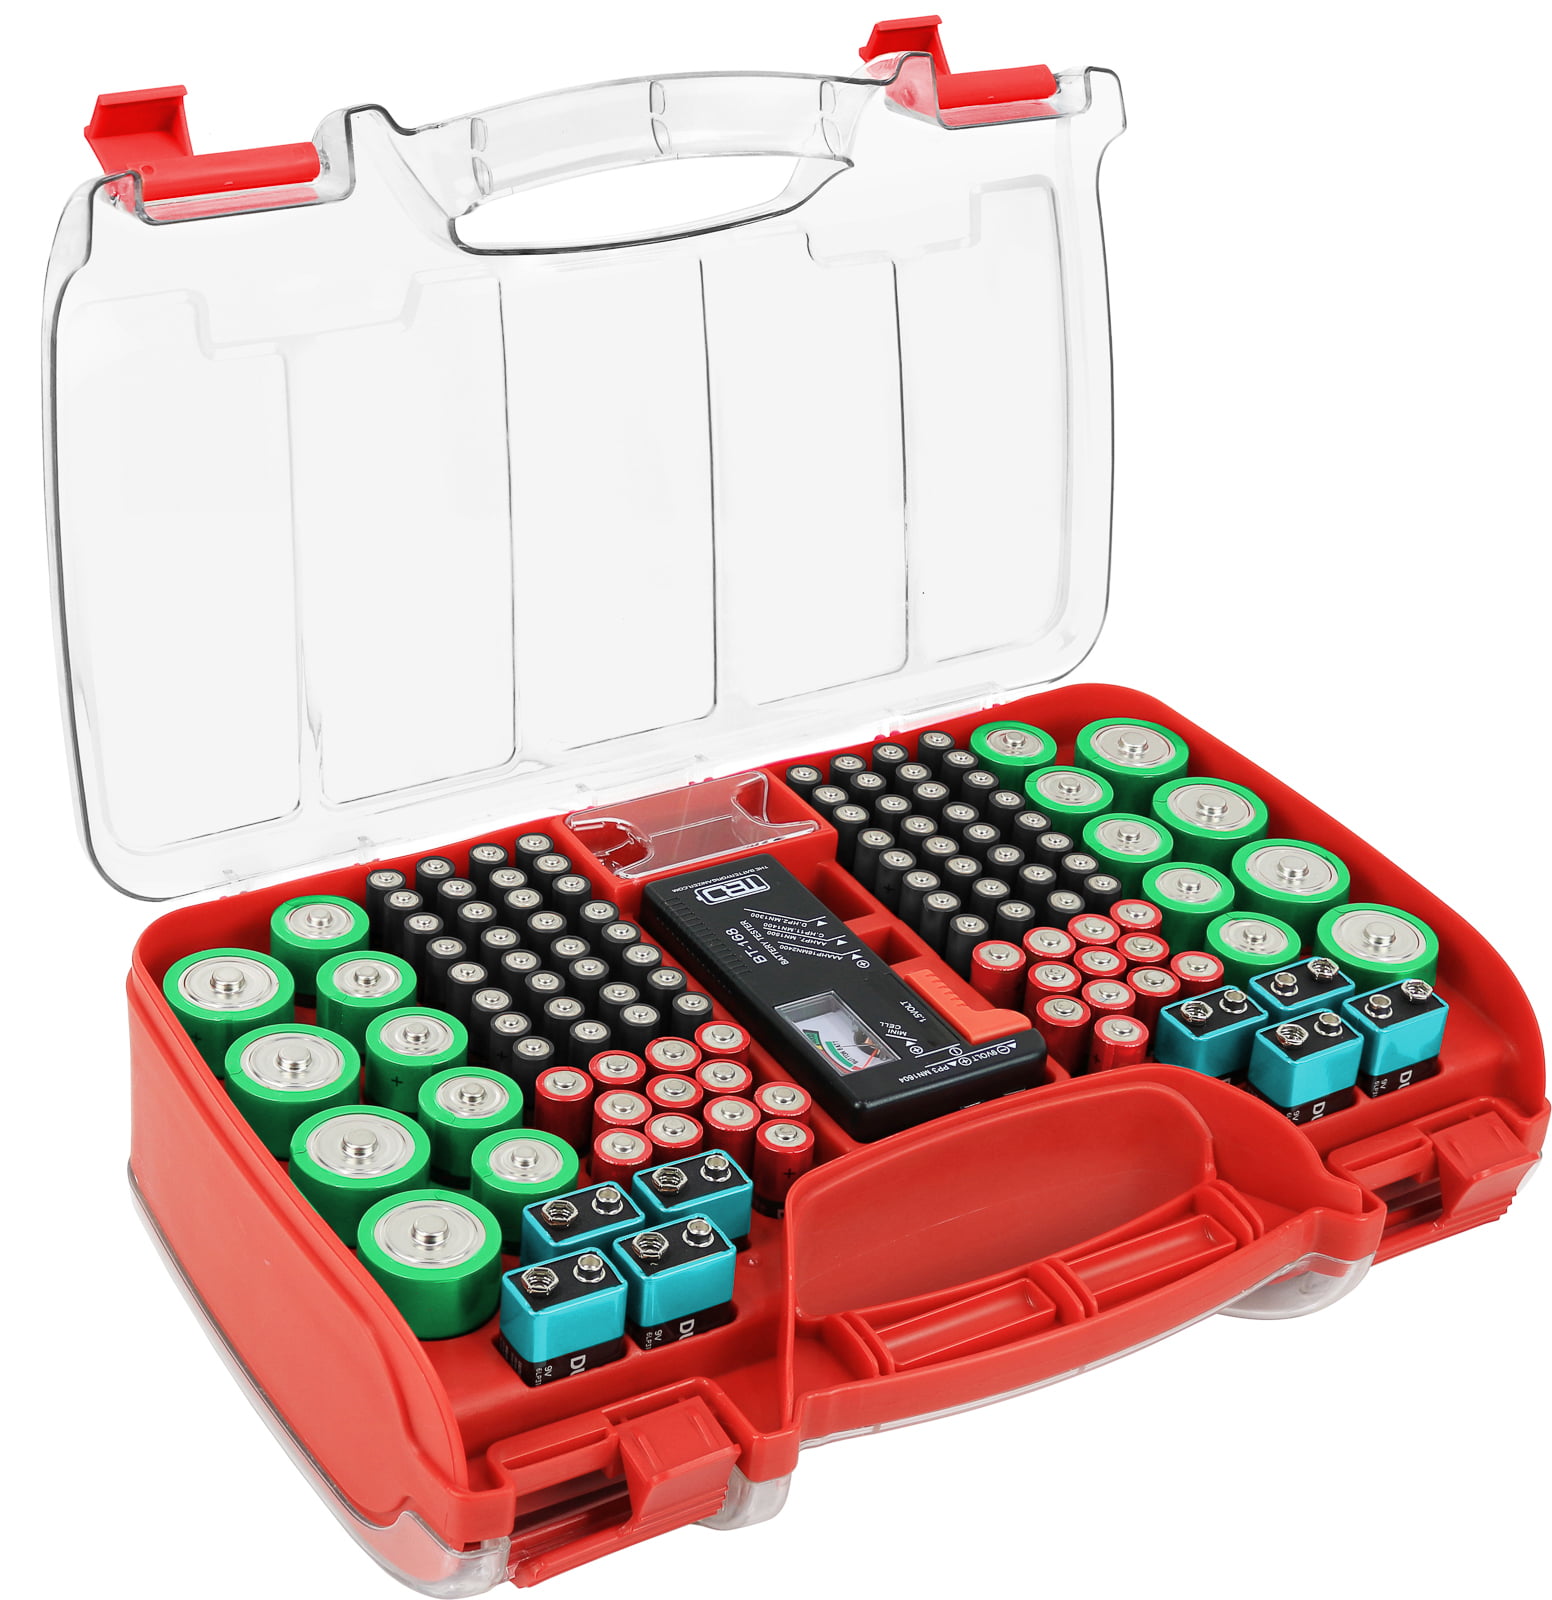 The Battery Organizer Storage Case with Hinged Clear Cover